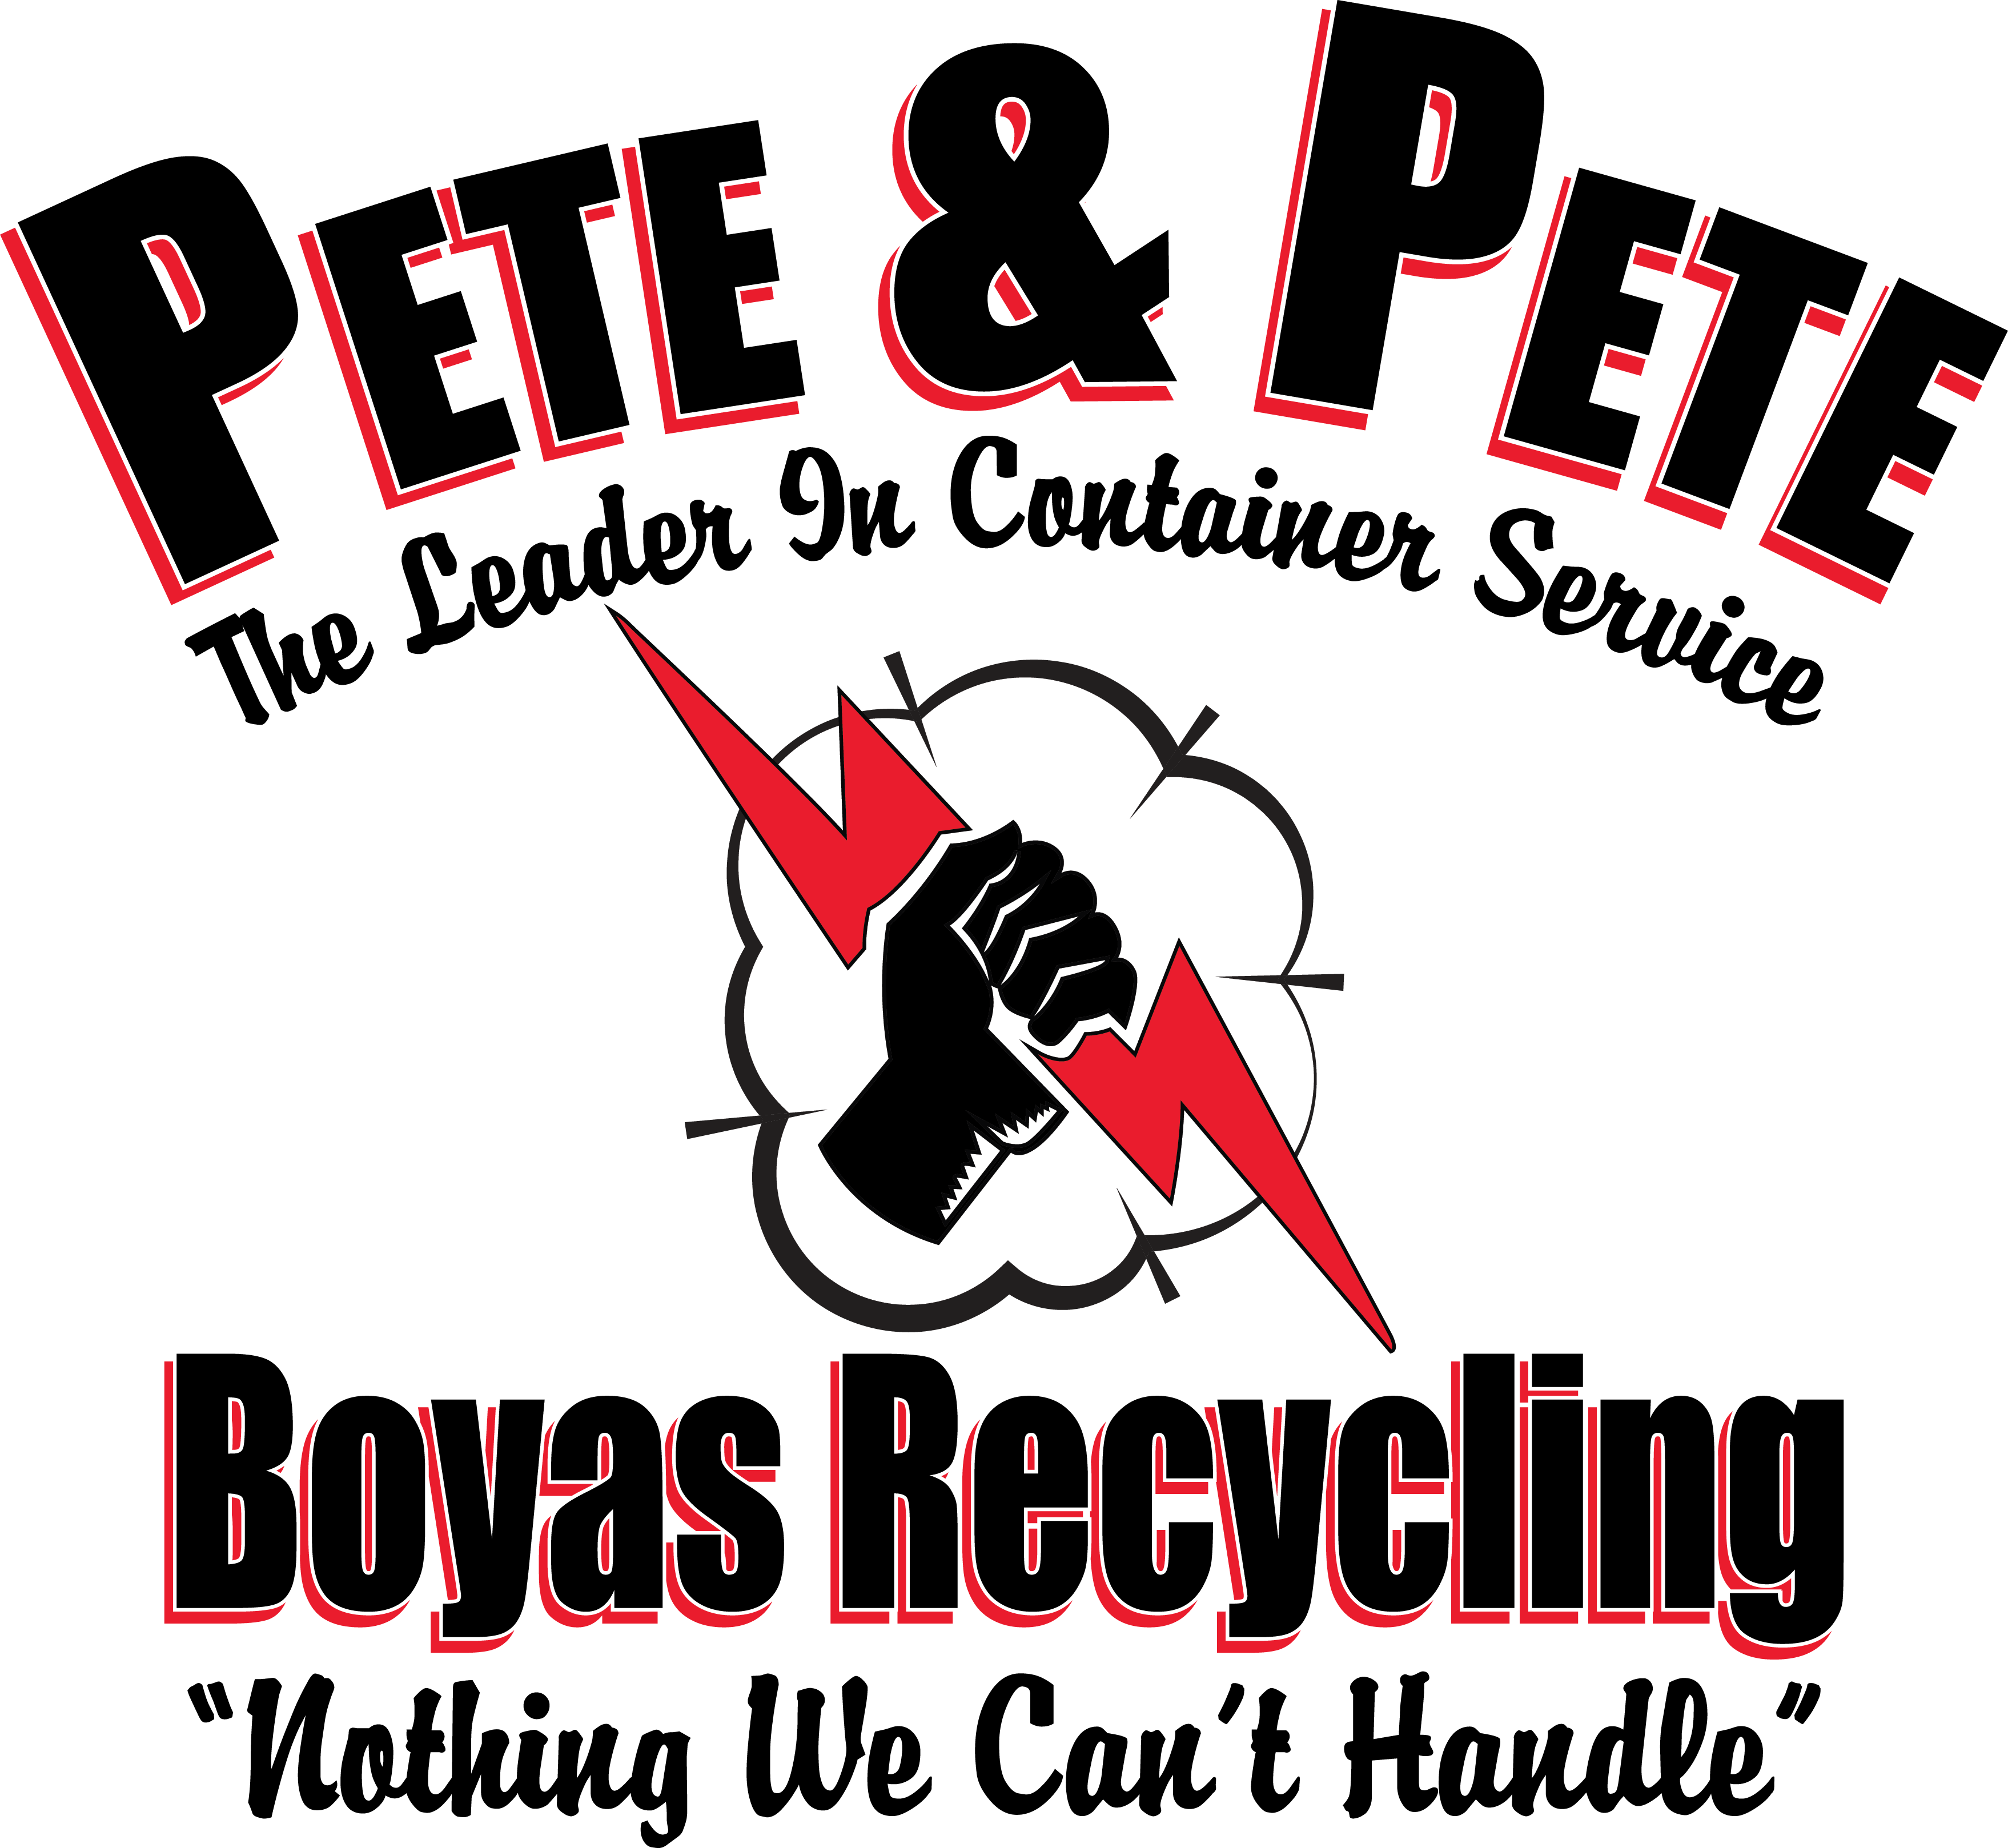 Pete & Pete logo, the leader in container services.